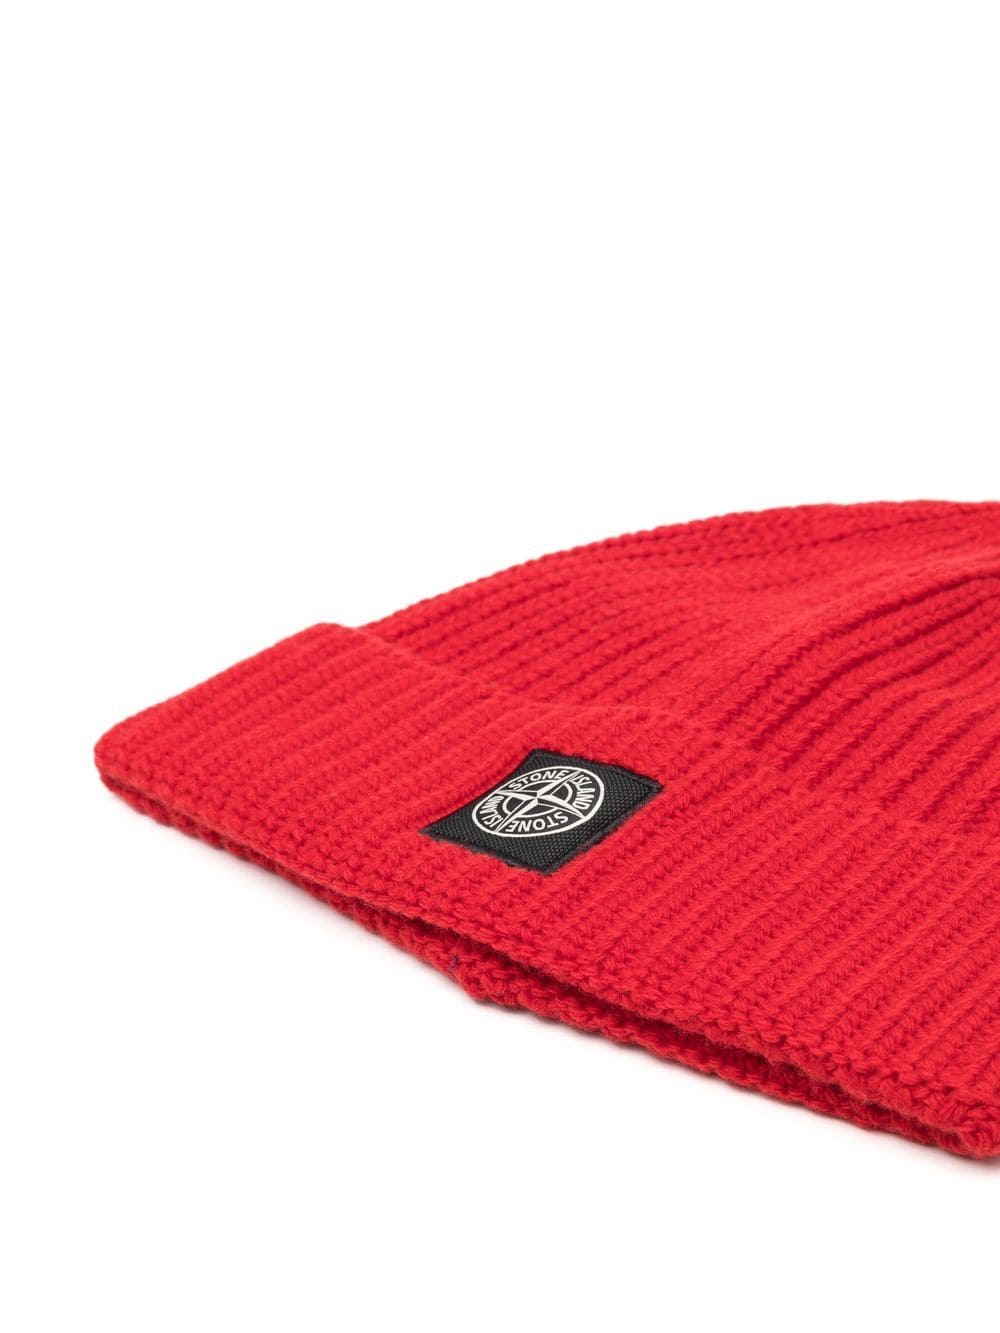 Louis Vuitton, Accessories, Authentic Ribbed Lv Headline Beanie Is A Pure  Wool Knit